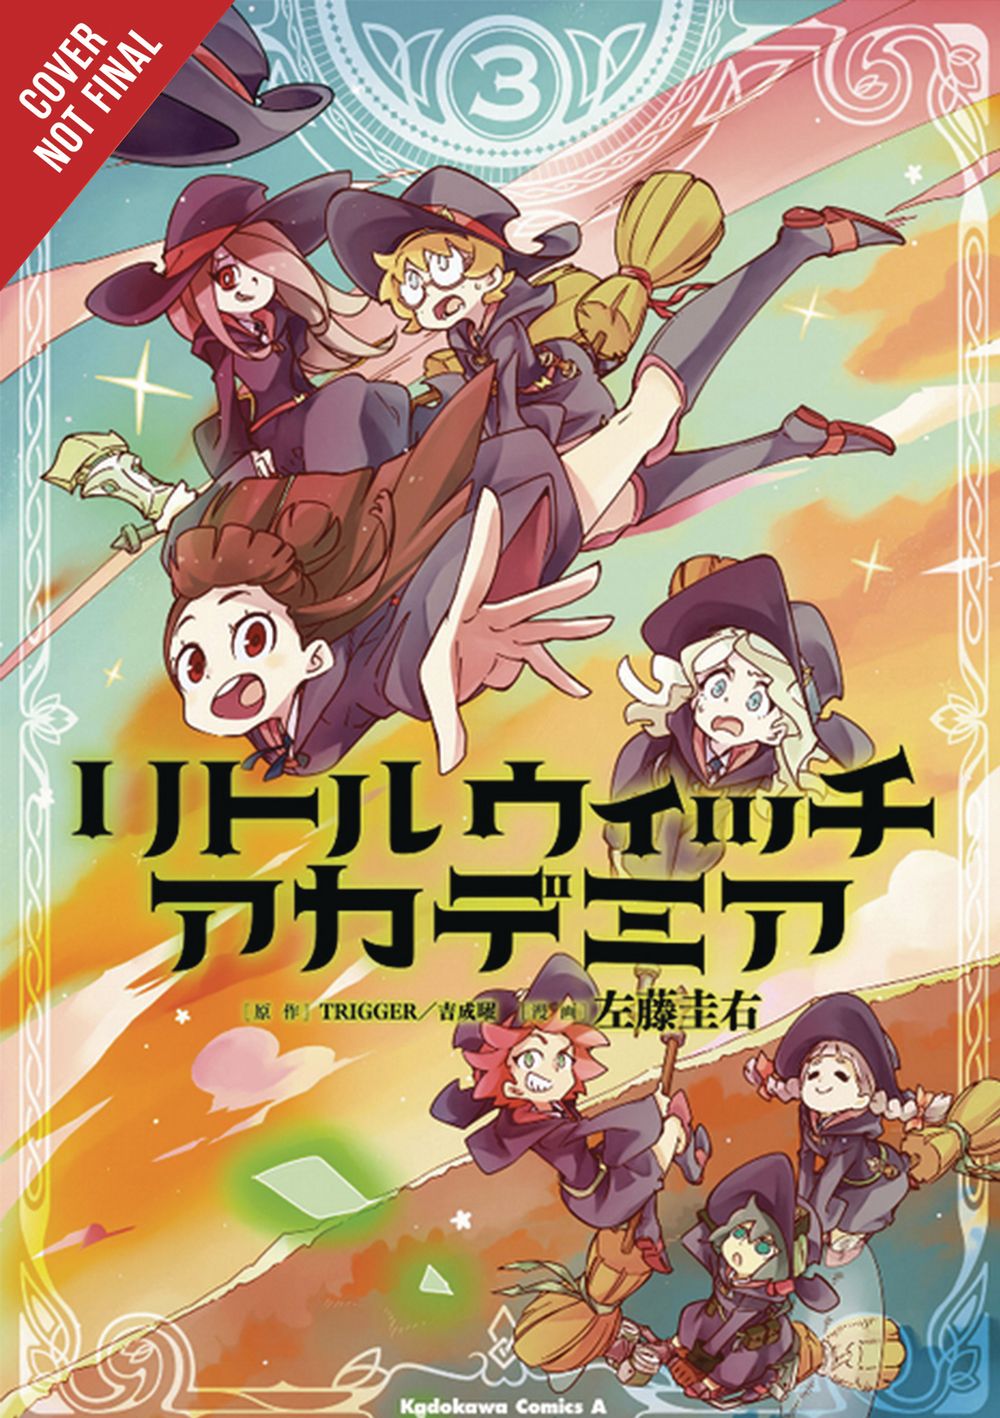 Little Witch Academia GN VOL 03